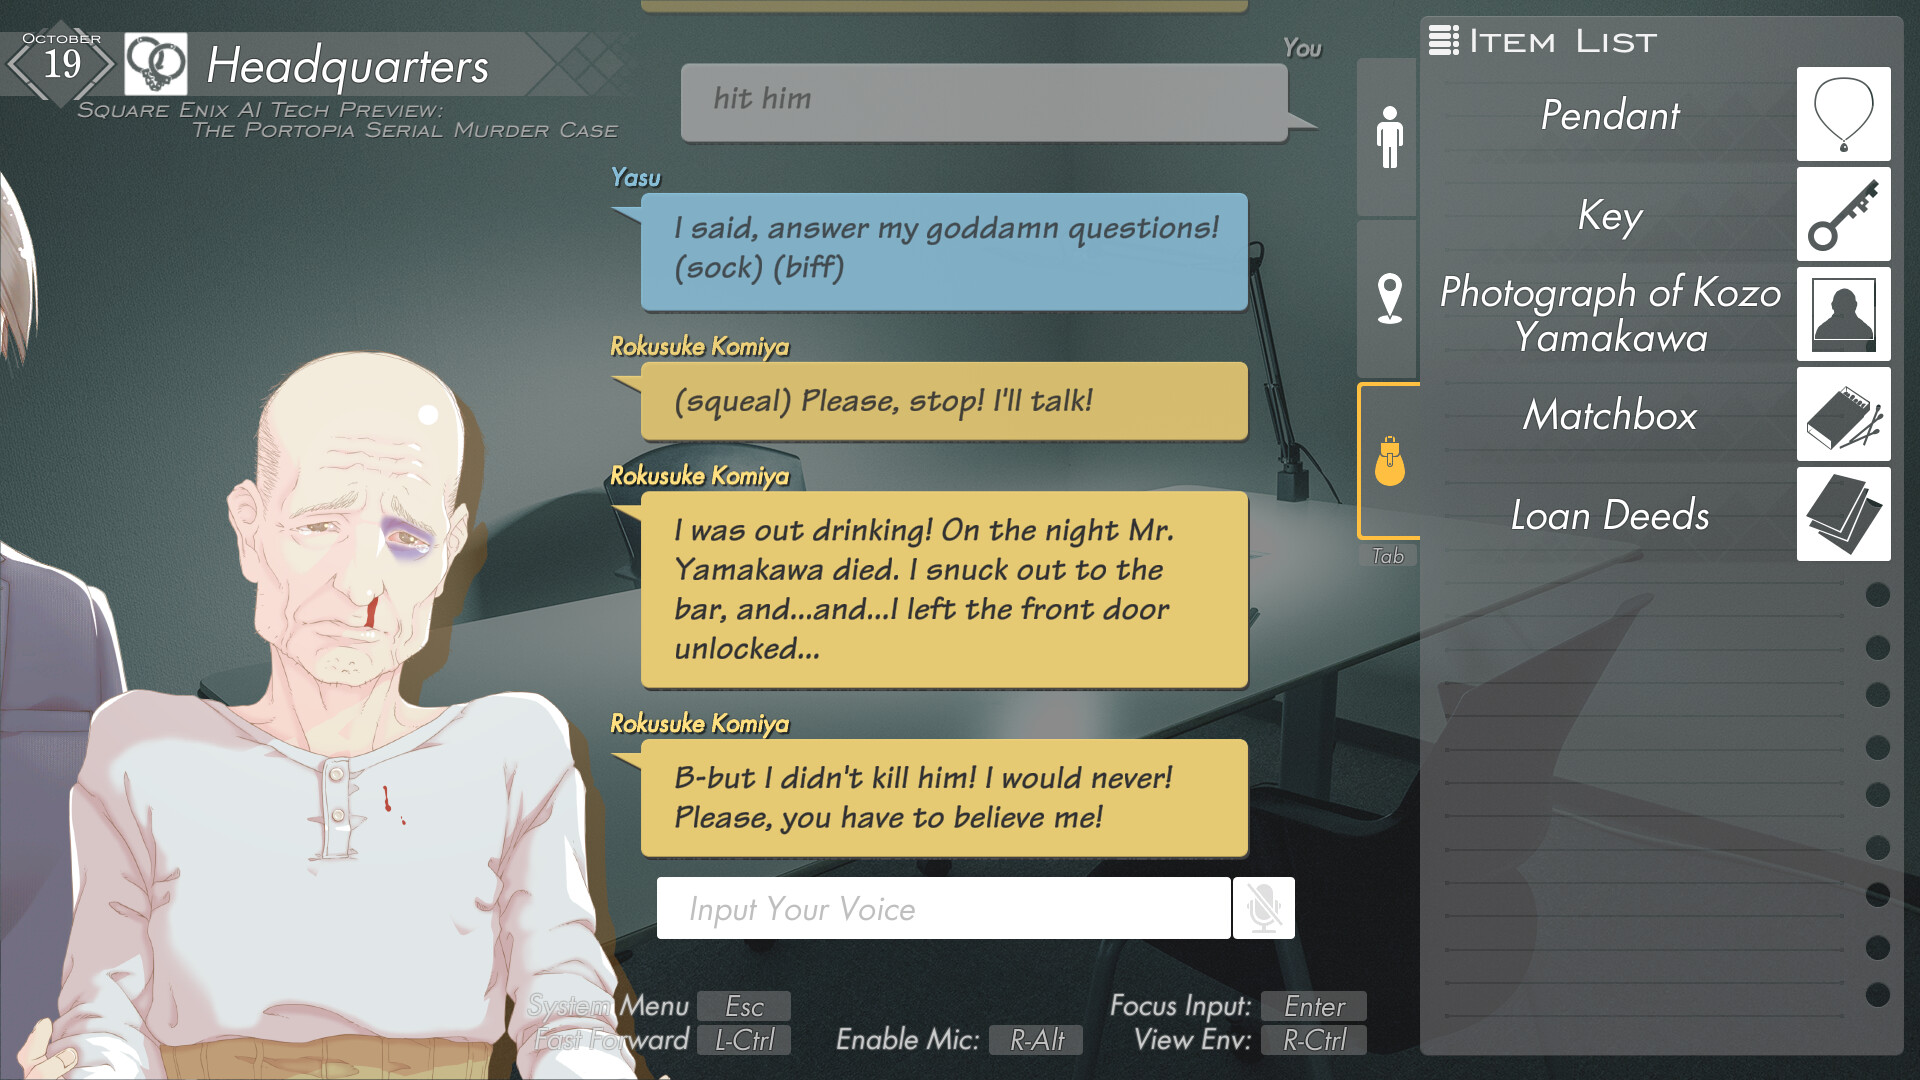 A screenshot of The Portopia Serial Murder Case depicting a man who has just been beaten by the police.